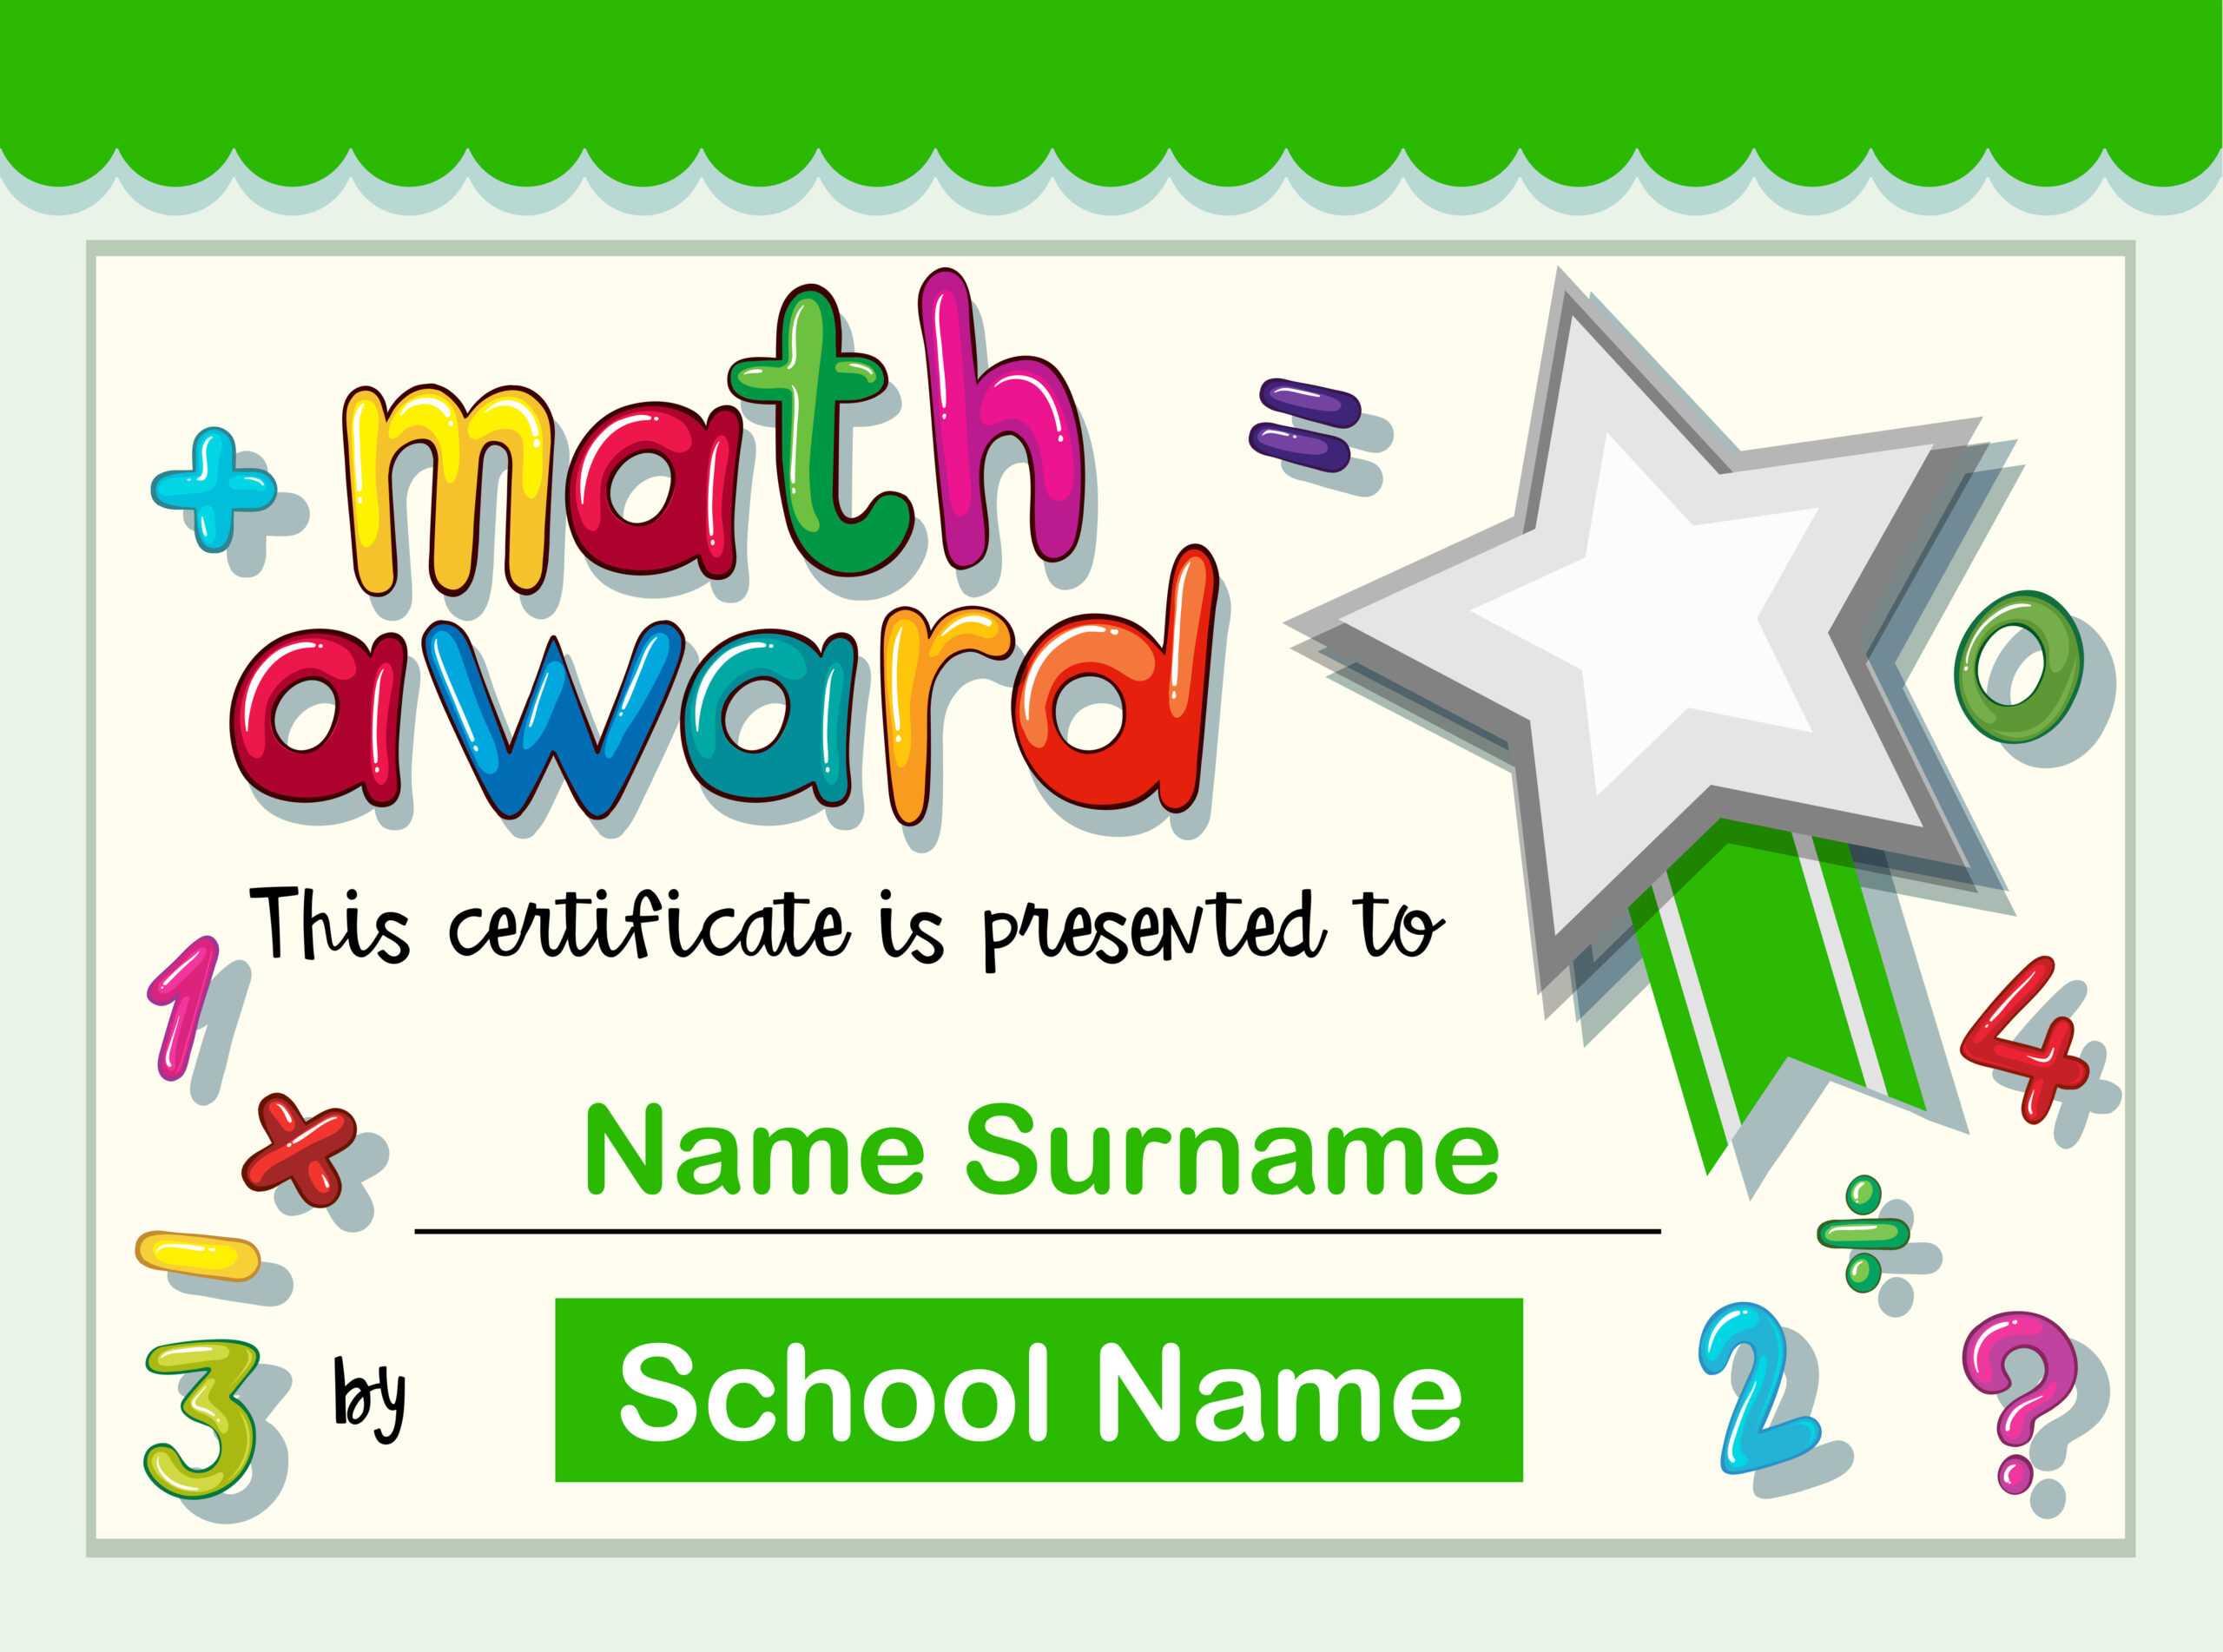 Certificate Template For Math Award - Download Free Vectors Pertaining To Math Certificate Template